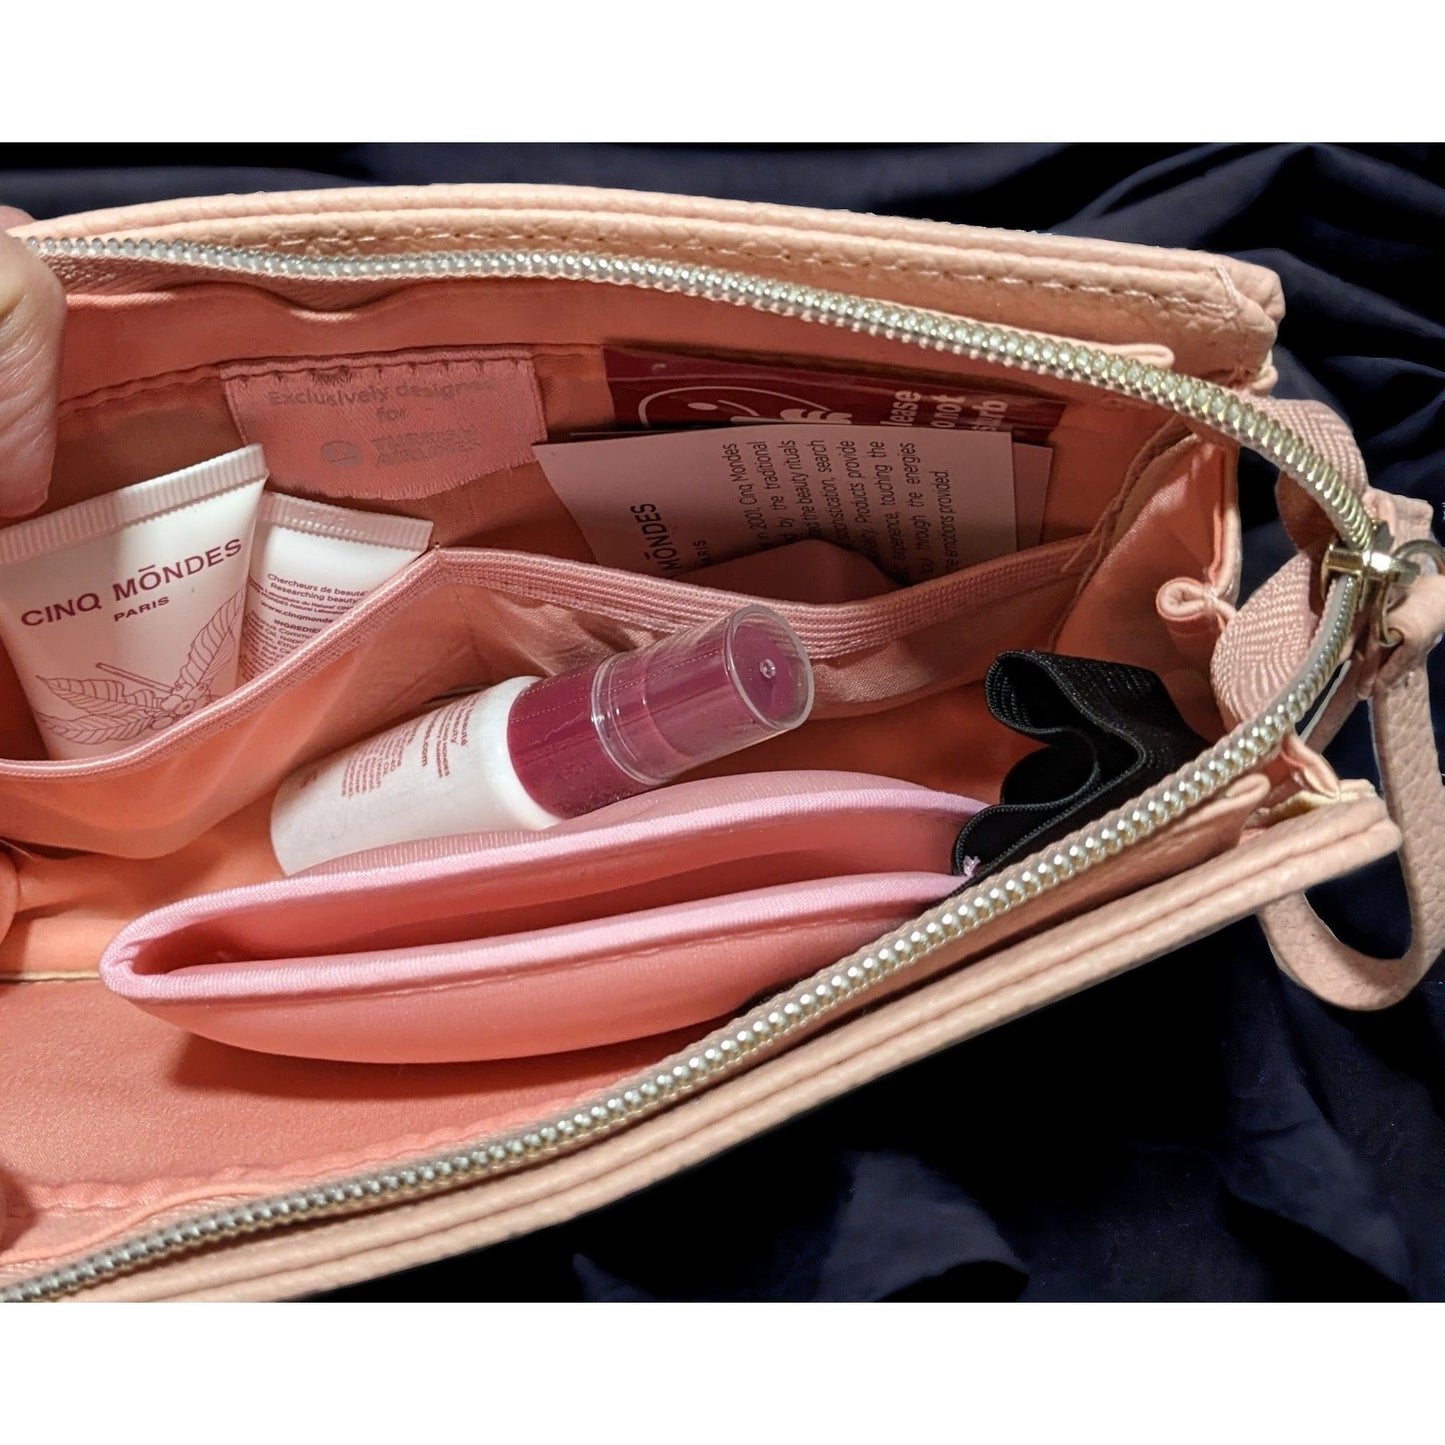 Coccinelle Turkish Airlines Toiletry Clutch With Goodies